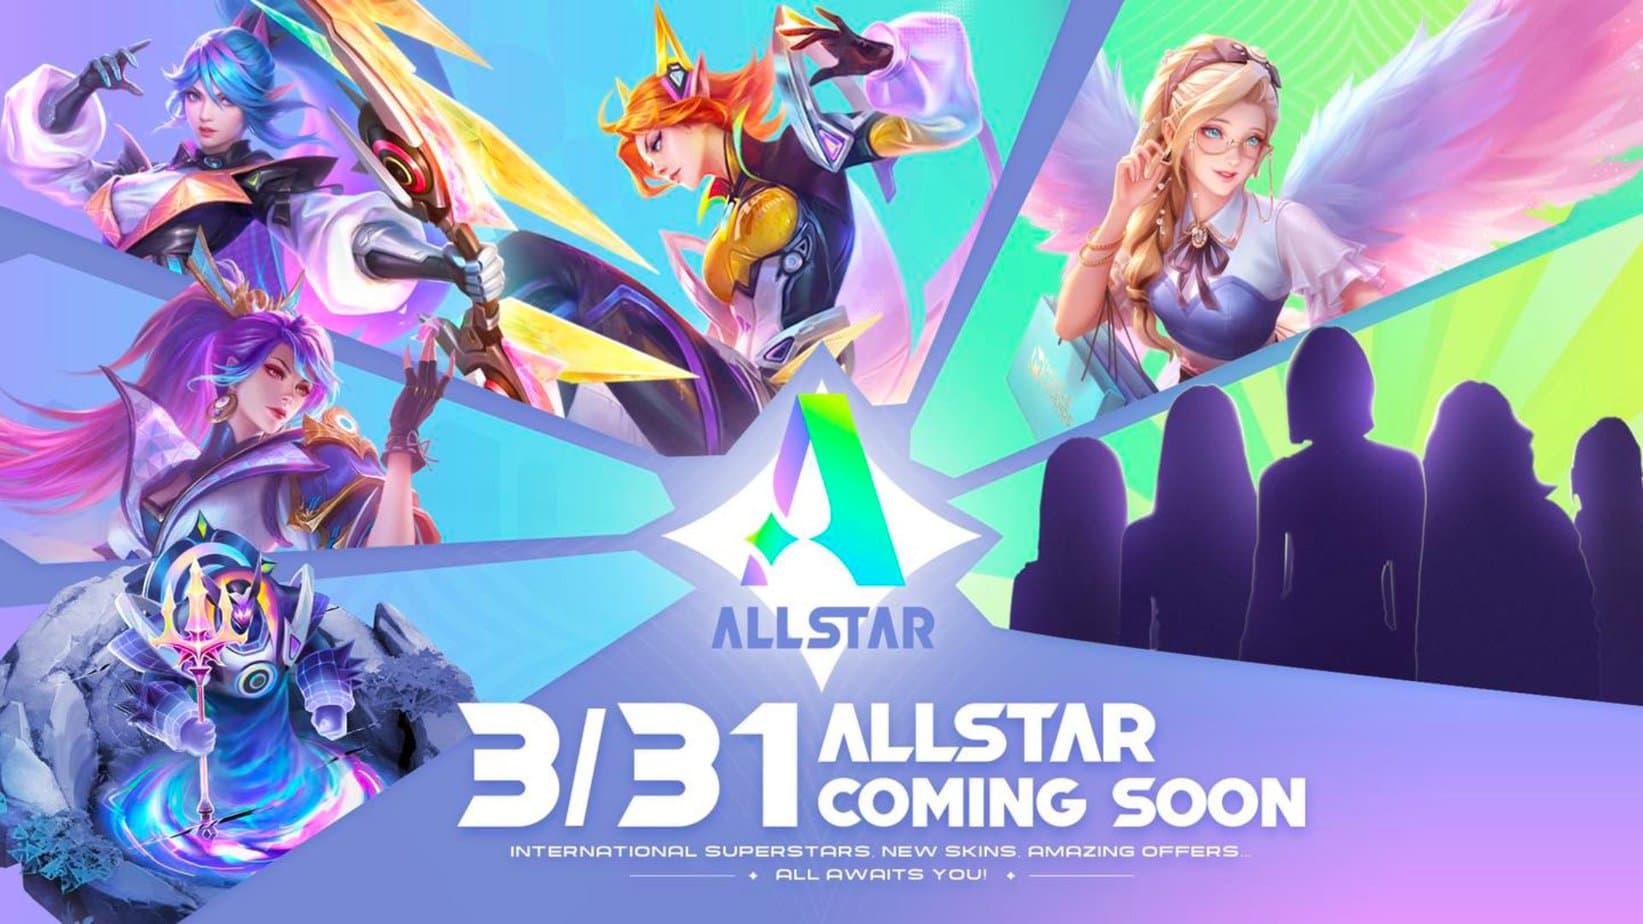 MLBB ALLSTAR event: Schedule, how to get free skins, rewards, and more - ONE Esports